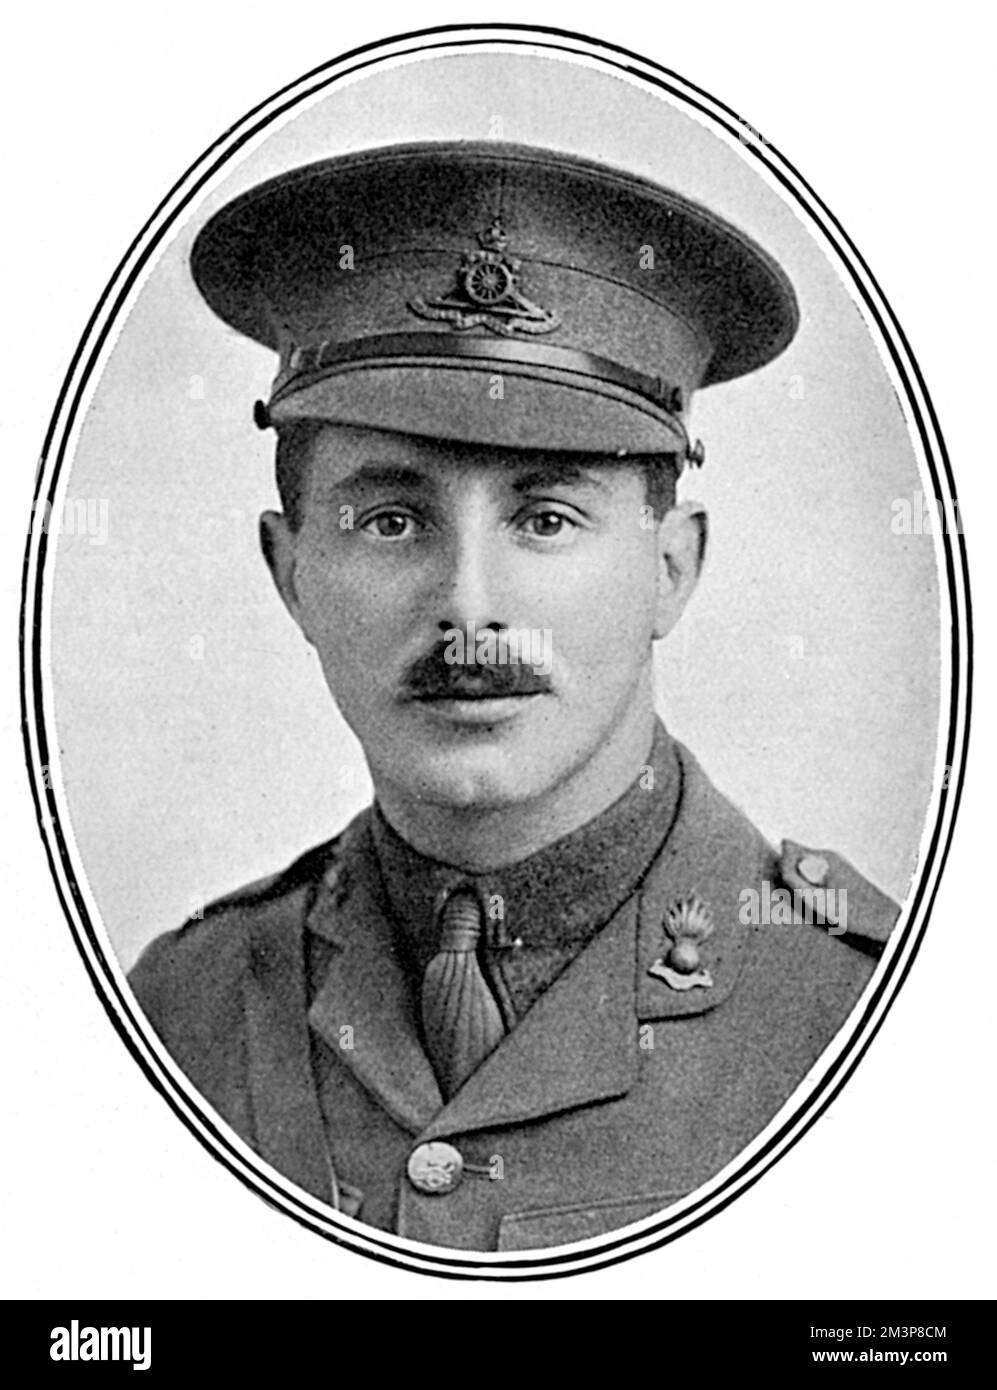 Gilbert Frankau (1884-1952), writer and war poet.  Frankau served in the British Army from the outbreak of war in 1914, first in the 9th Battalion of the East Surrey Regiment, and then (with the rank of Captain) as a gunner in the 107th Brigade of the Royal Field Artillery  experiences that he later used in novels. He fought in major battles of the British Expeditionary Force in France and wrote for the Wipers Times before being invalided out and given a posting in Italy. The family business not having survived the war, he became a writer.     Date: 1916 Stock Photo